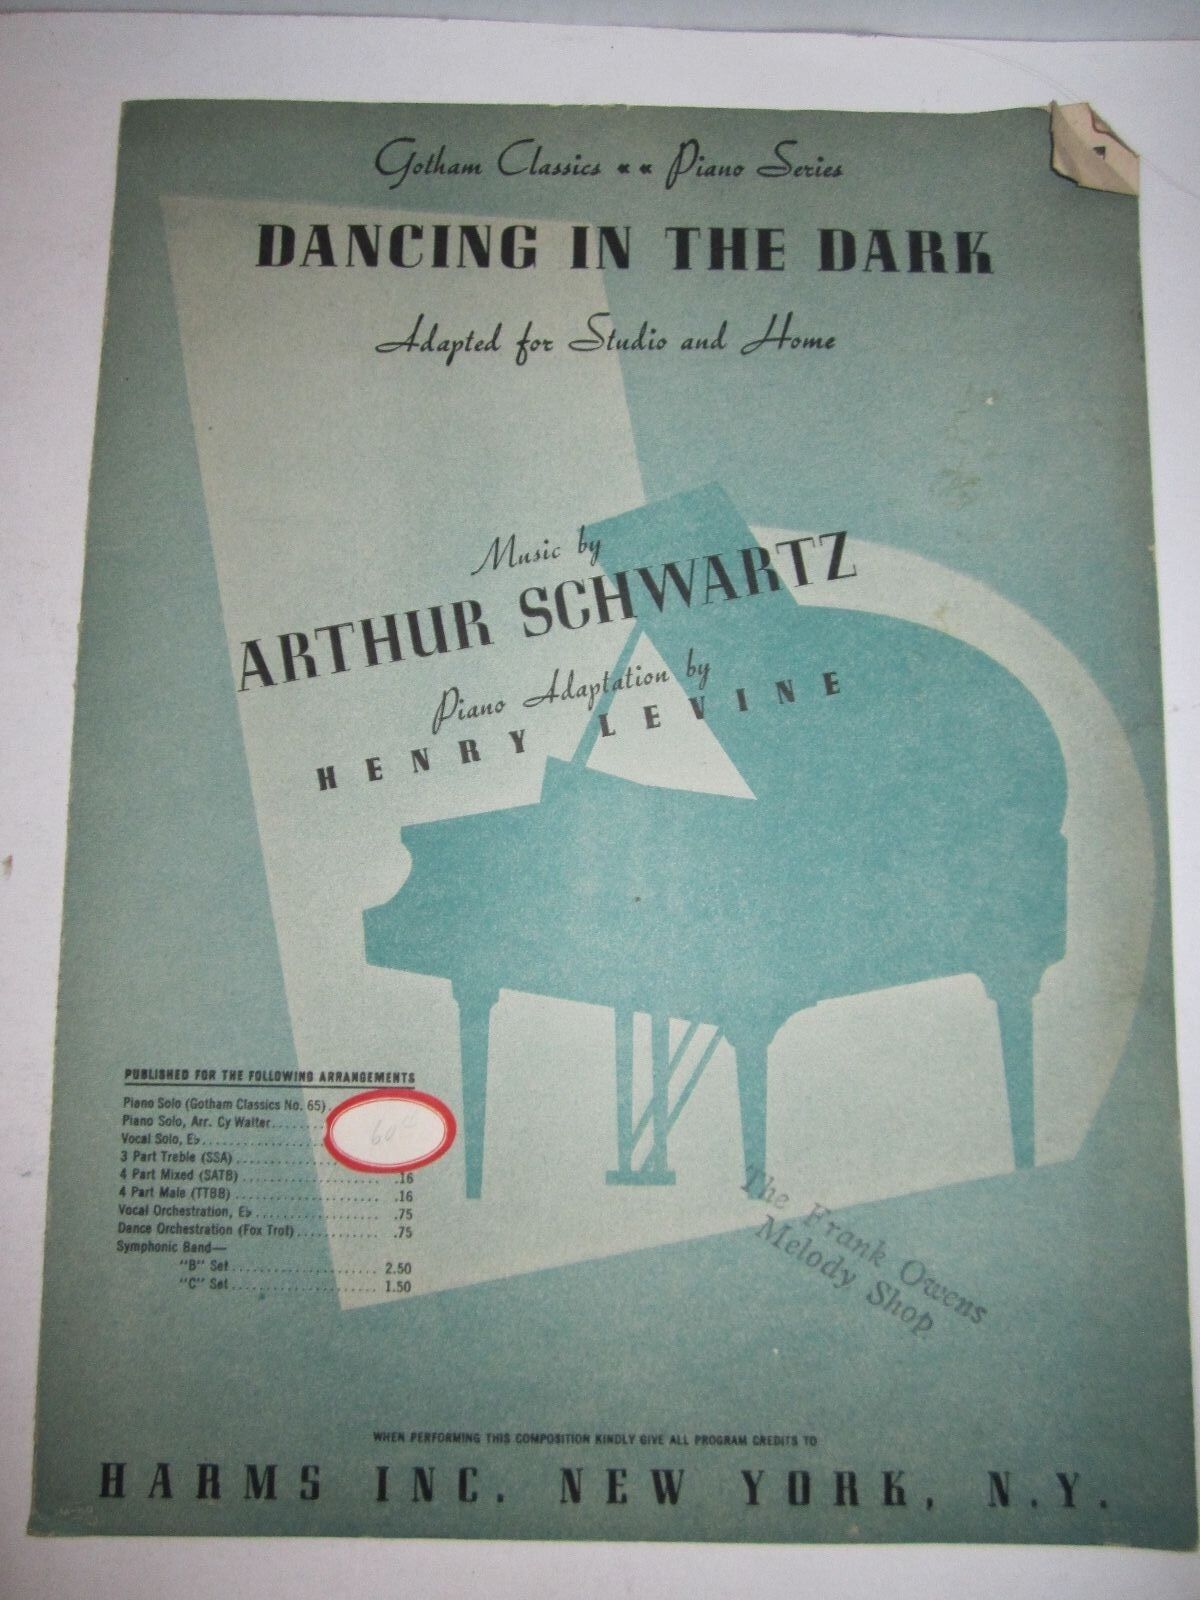 12 VINTAGE MUSIC SHEETS - MOSTLY COVERS WITH SOME MUSIC - #1 - TUB BN-14